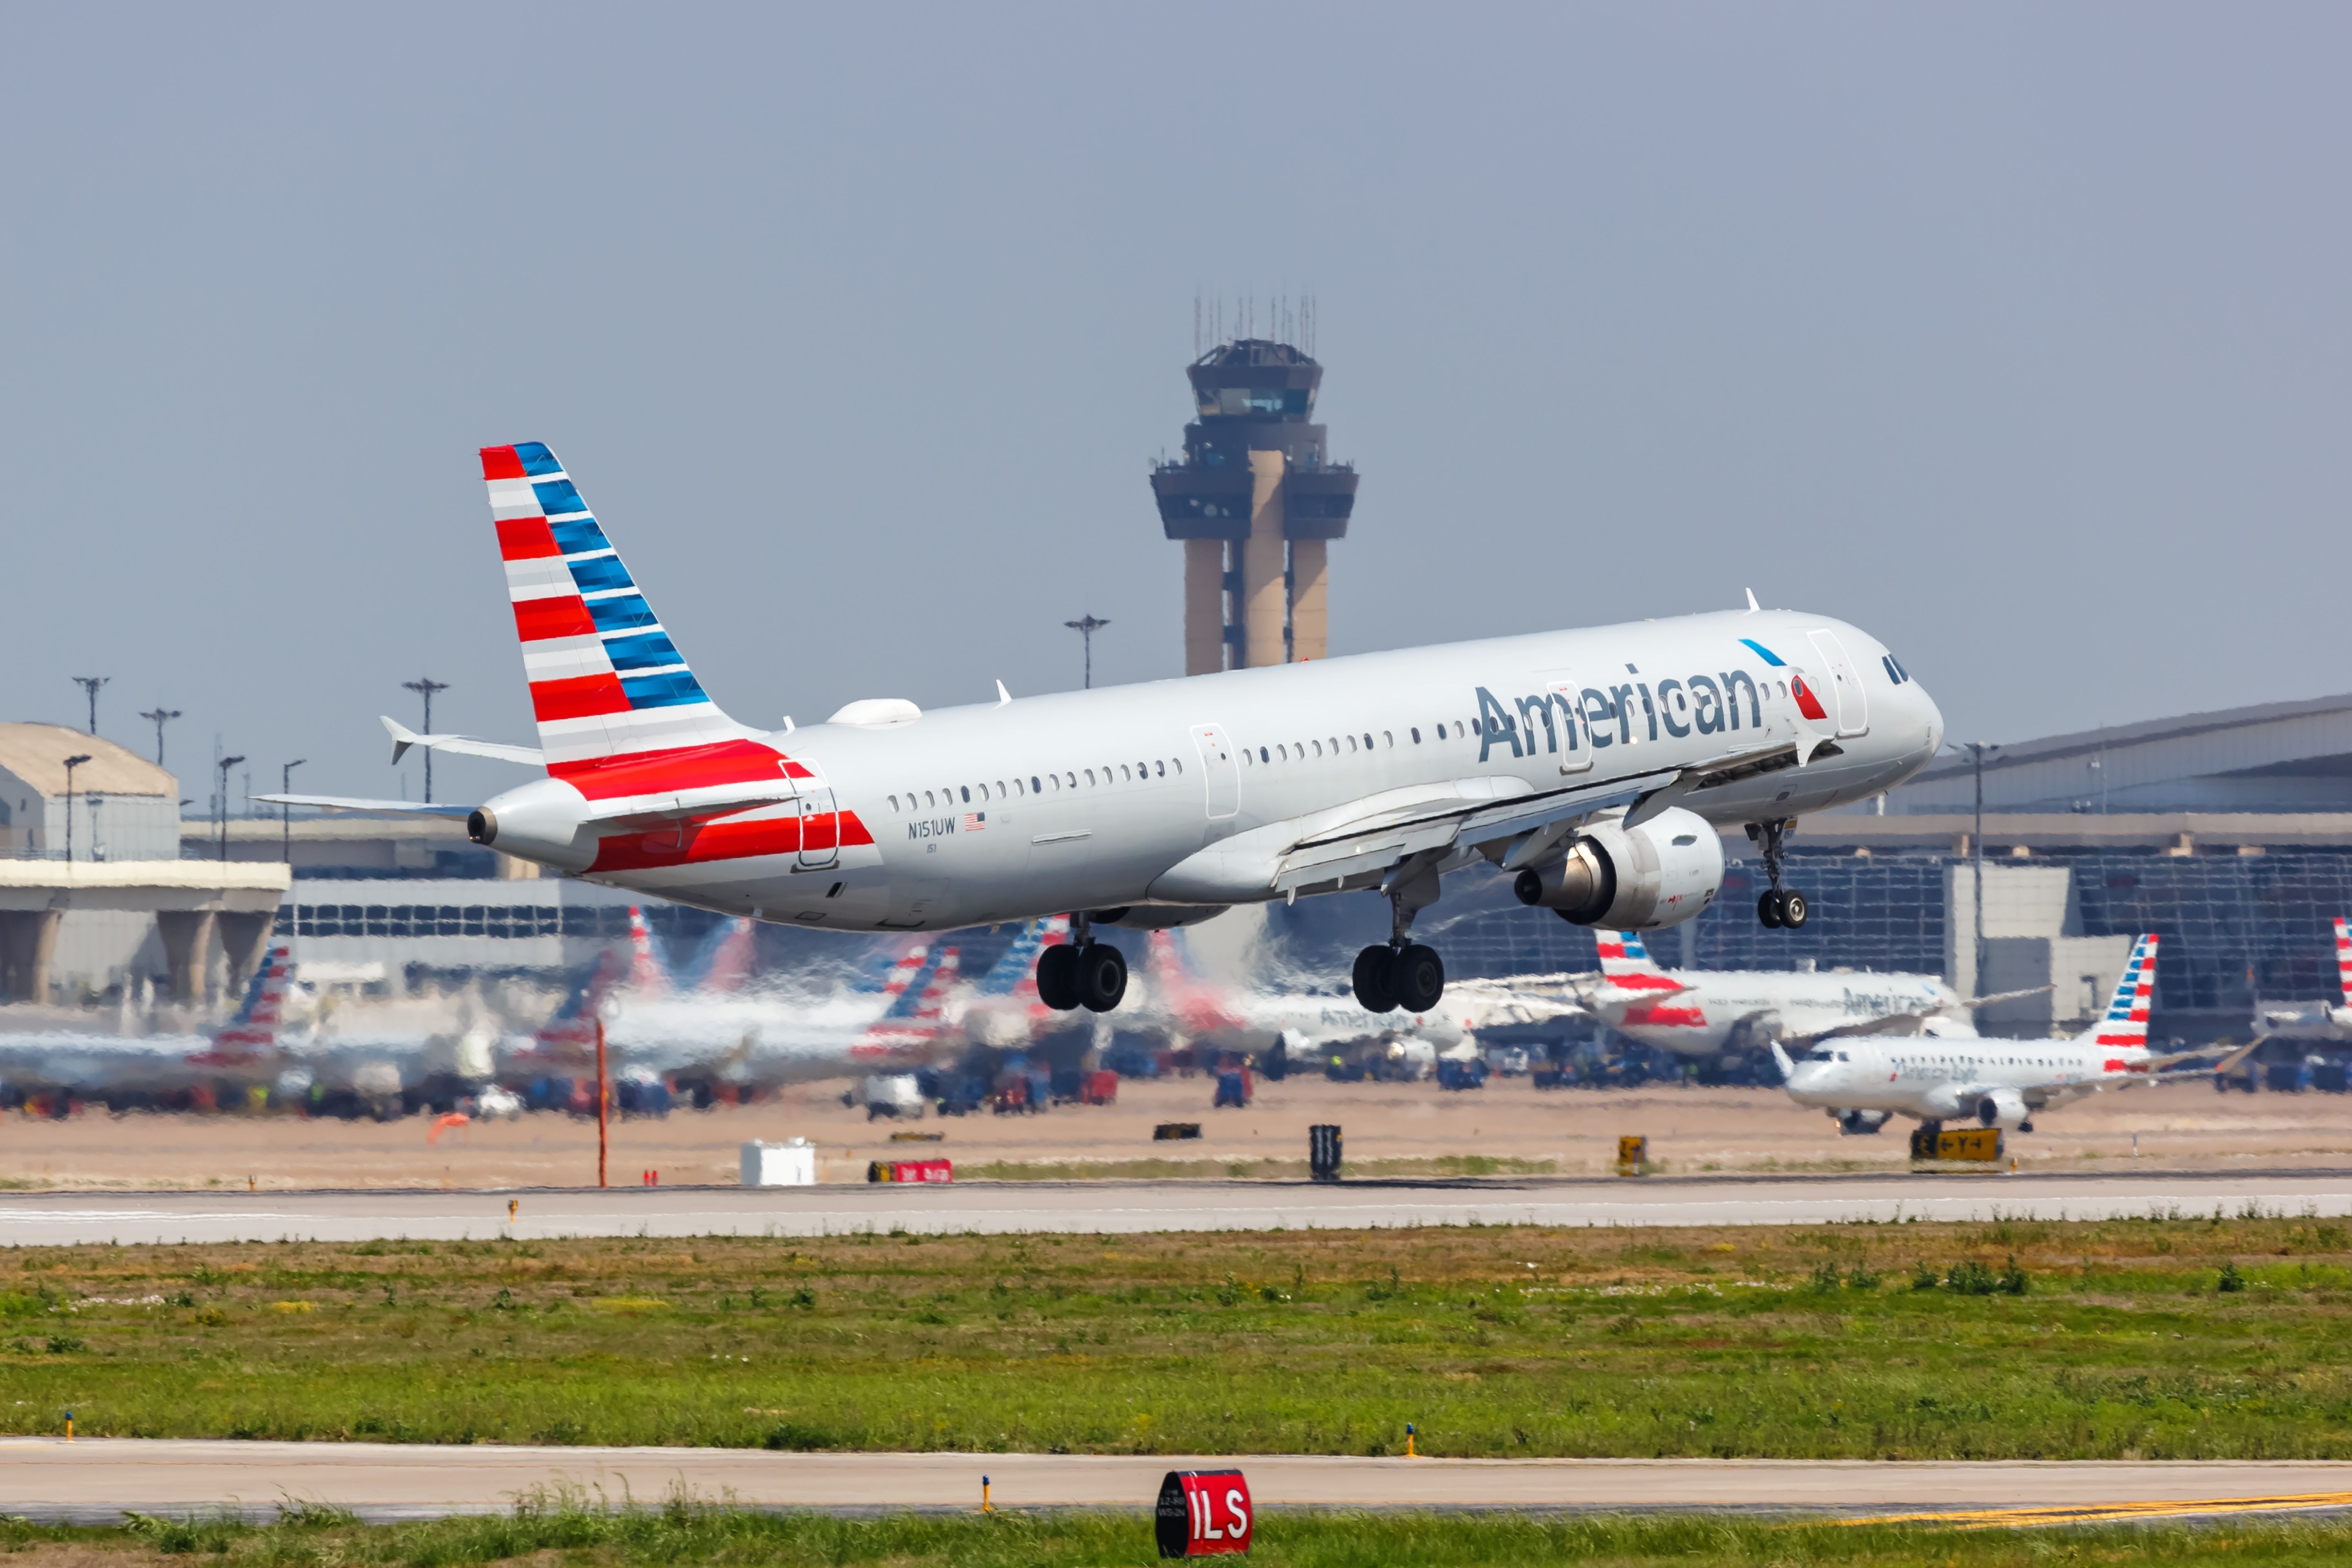 American Airlines Airbus A321 at DFW